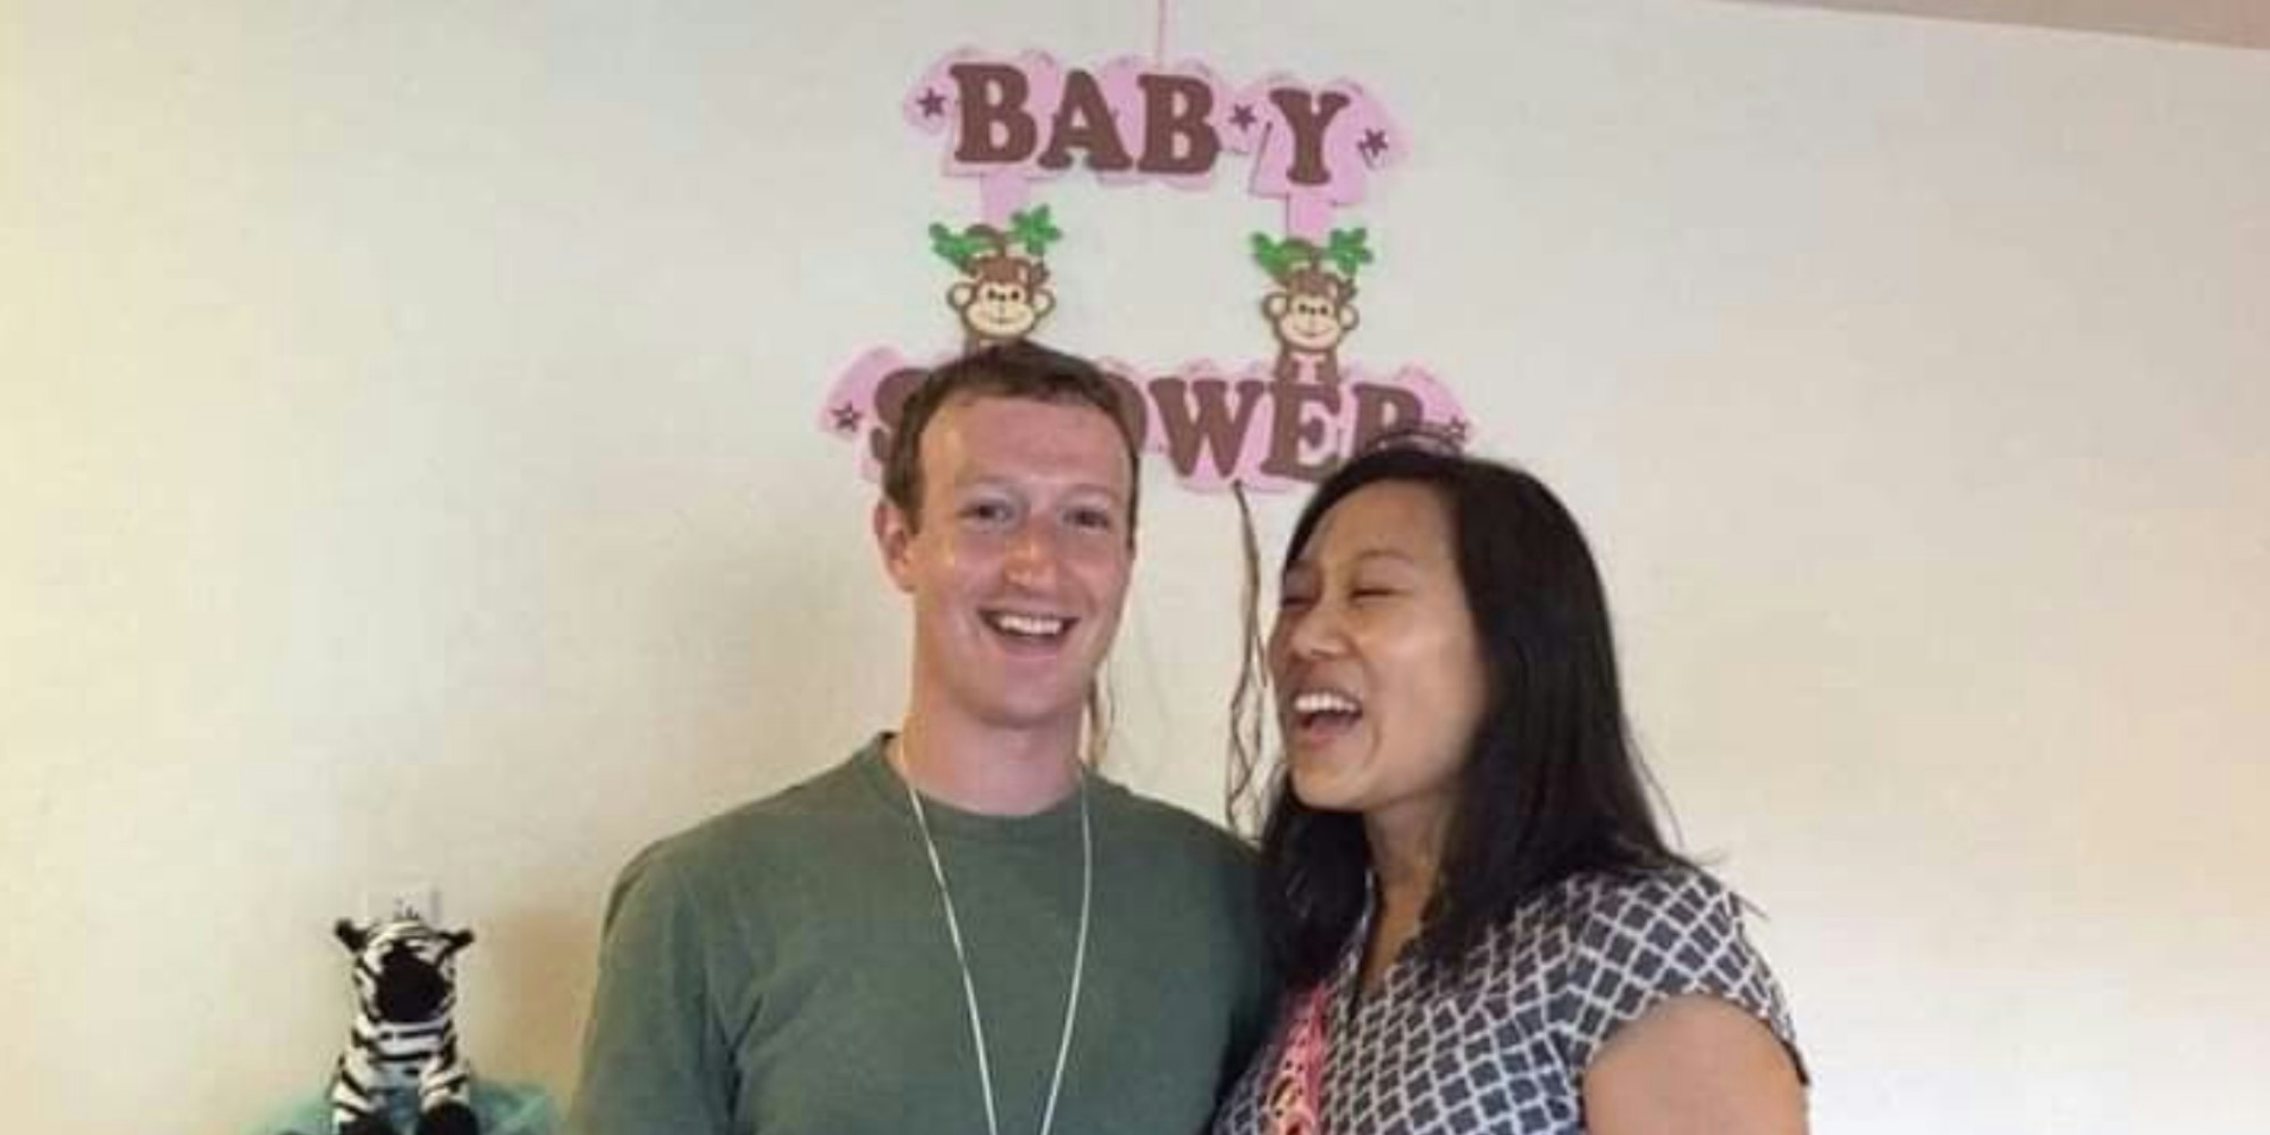 Mark Zuckerberg and his wife at a baby shower